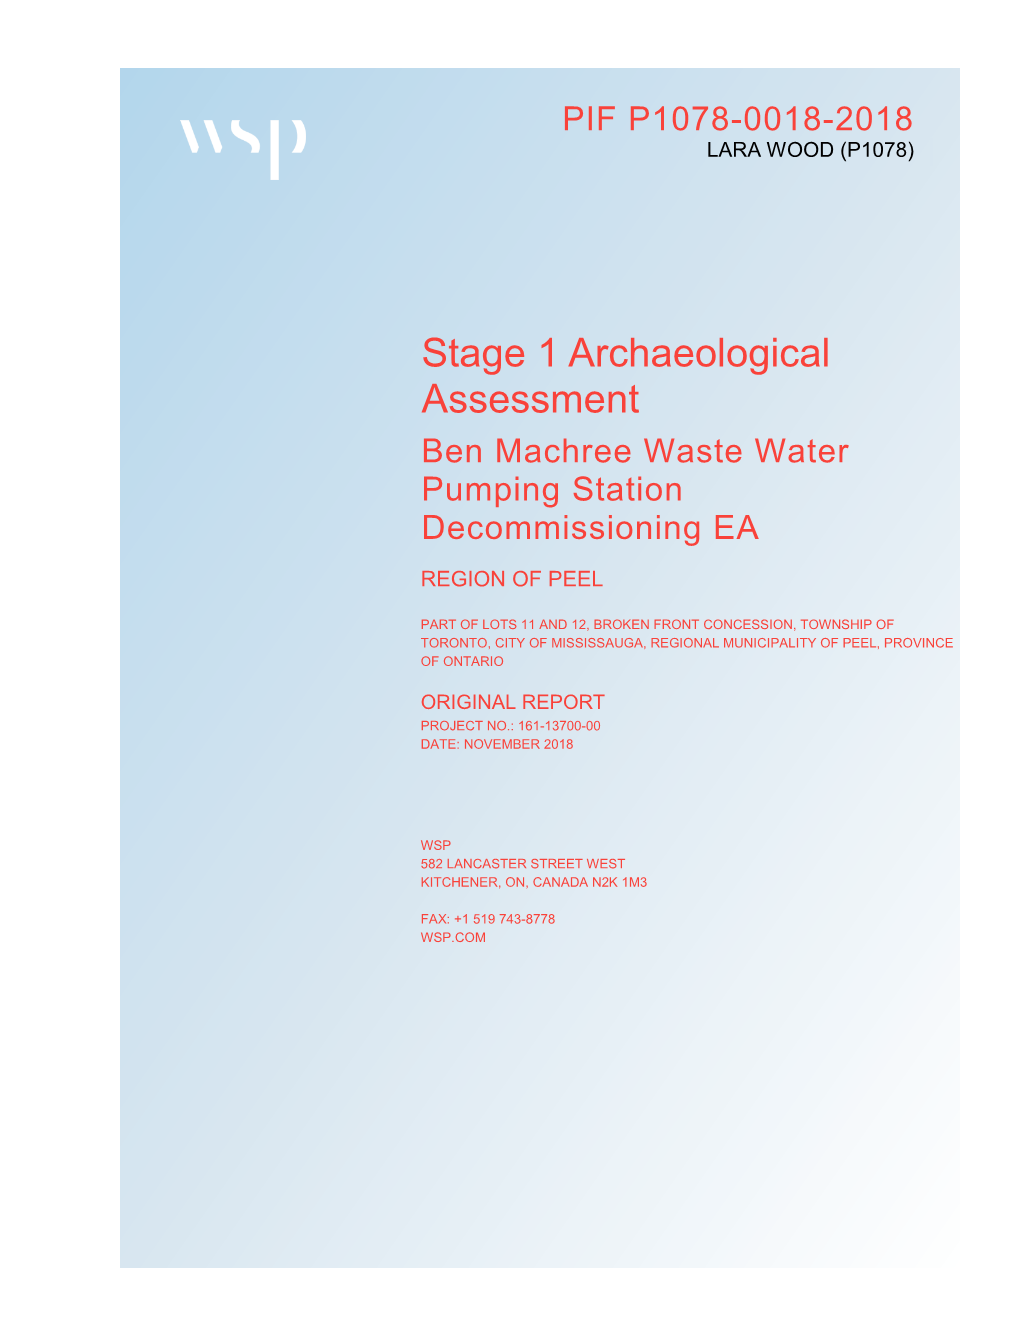 Stage 1 Archaeological Assessment Ben Machree Waste Water Pumping Station Decommissioning EA